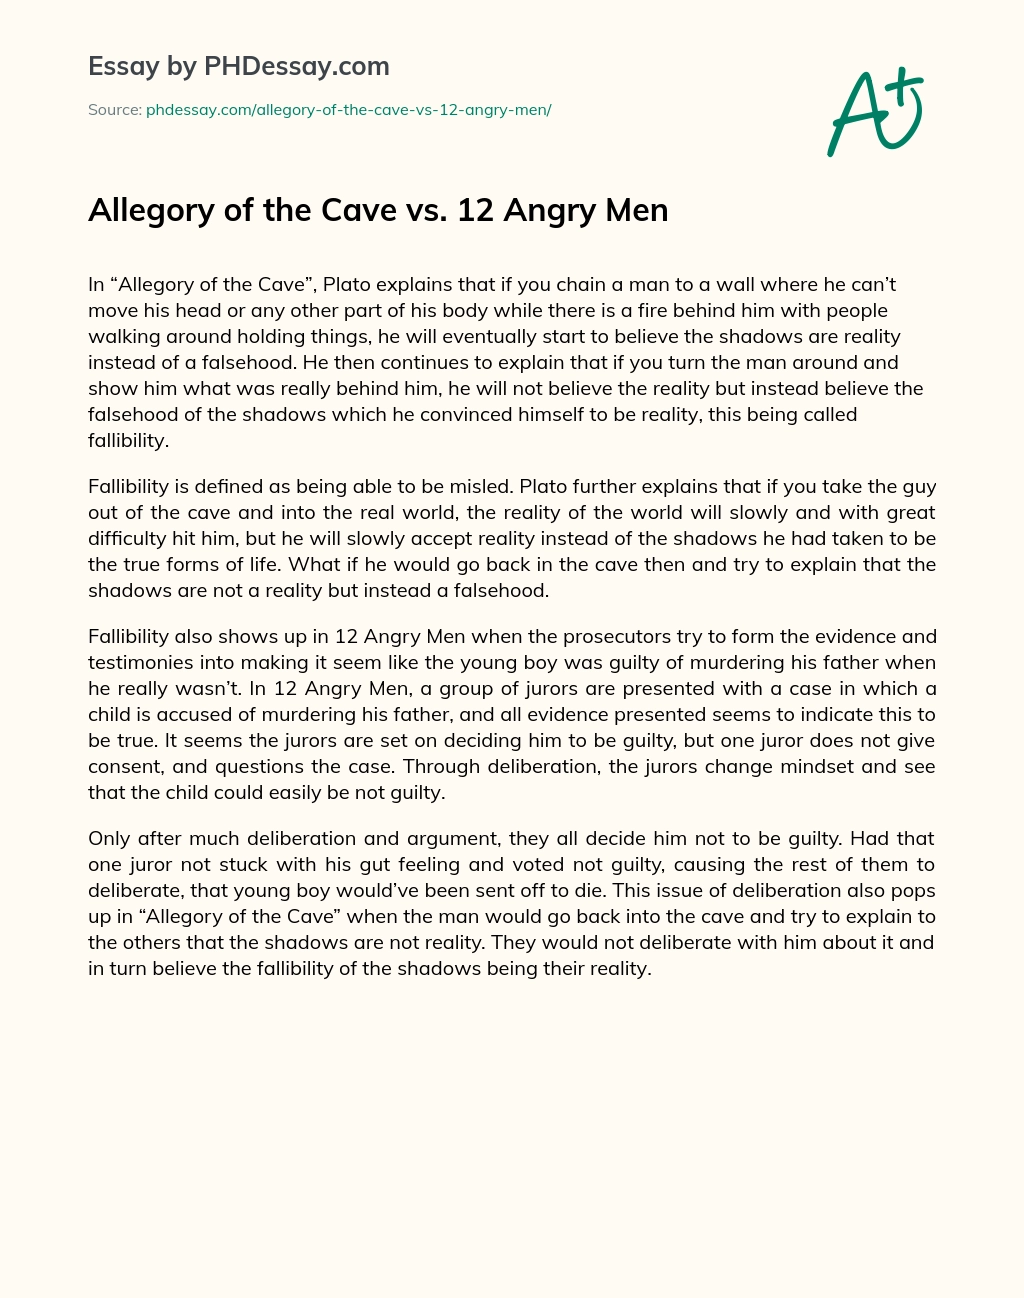 Allegory of the Cave vs. 12 Angry Men essay